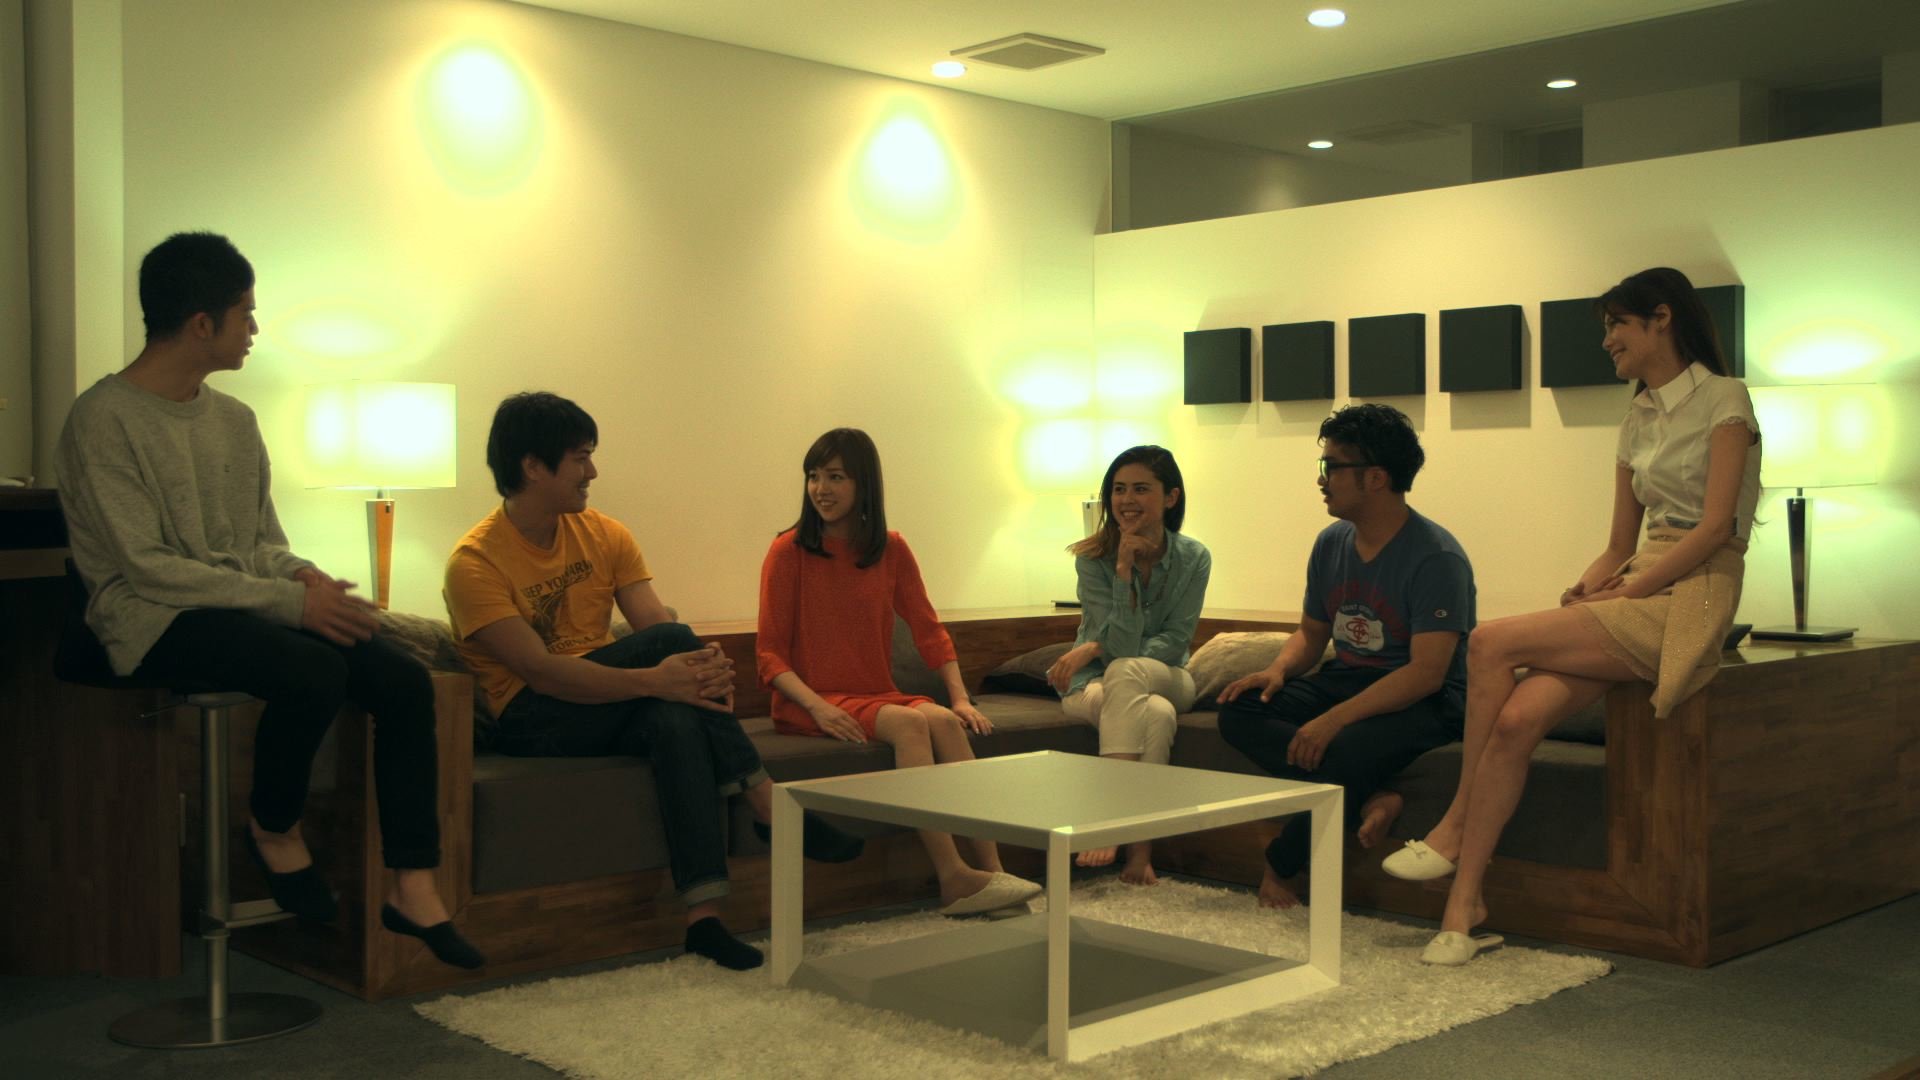 Terrace House Wallpapers